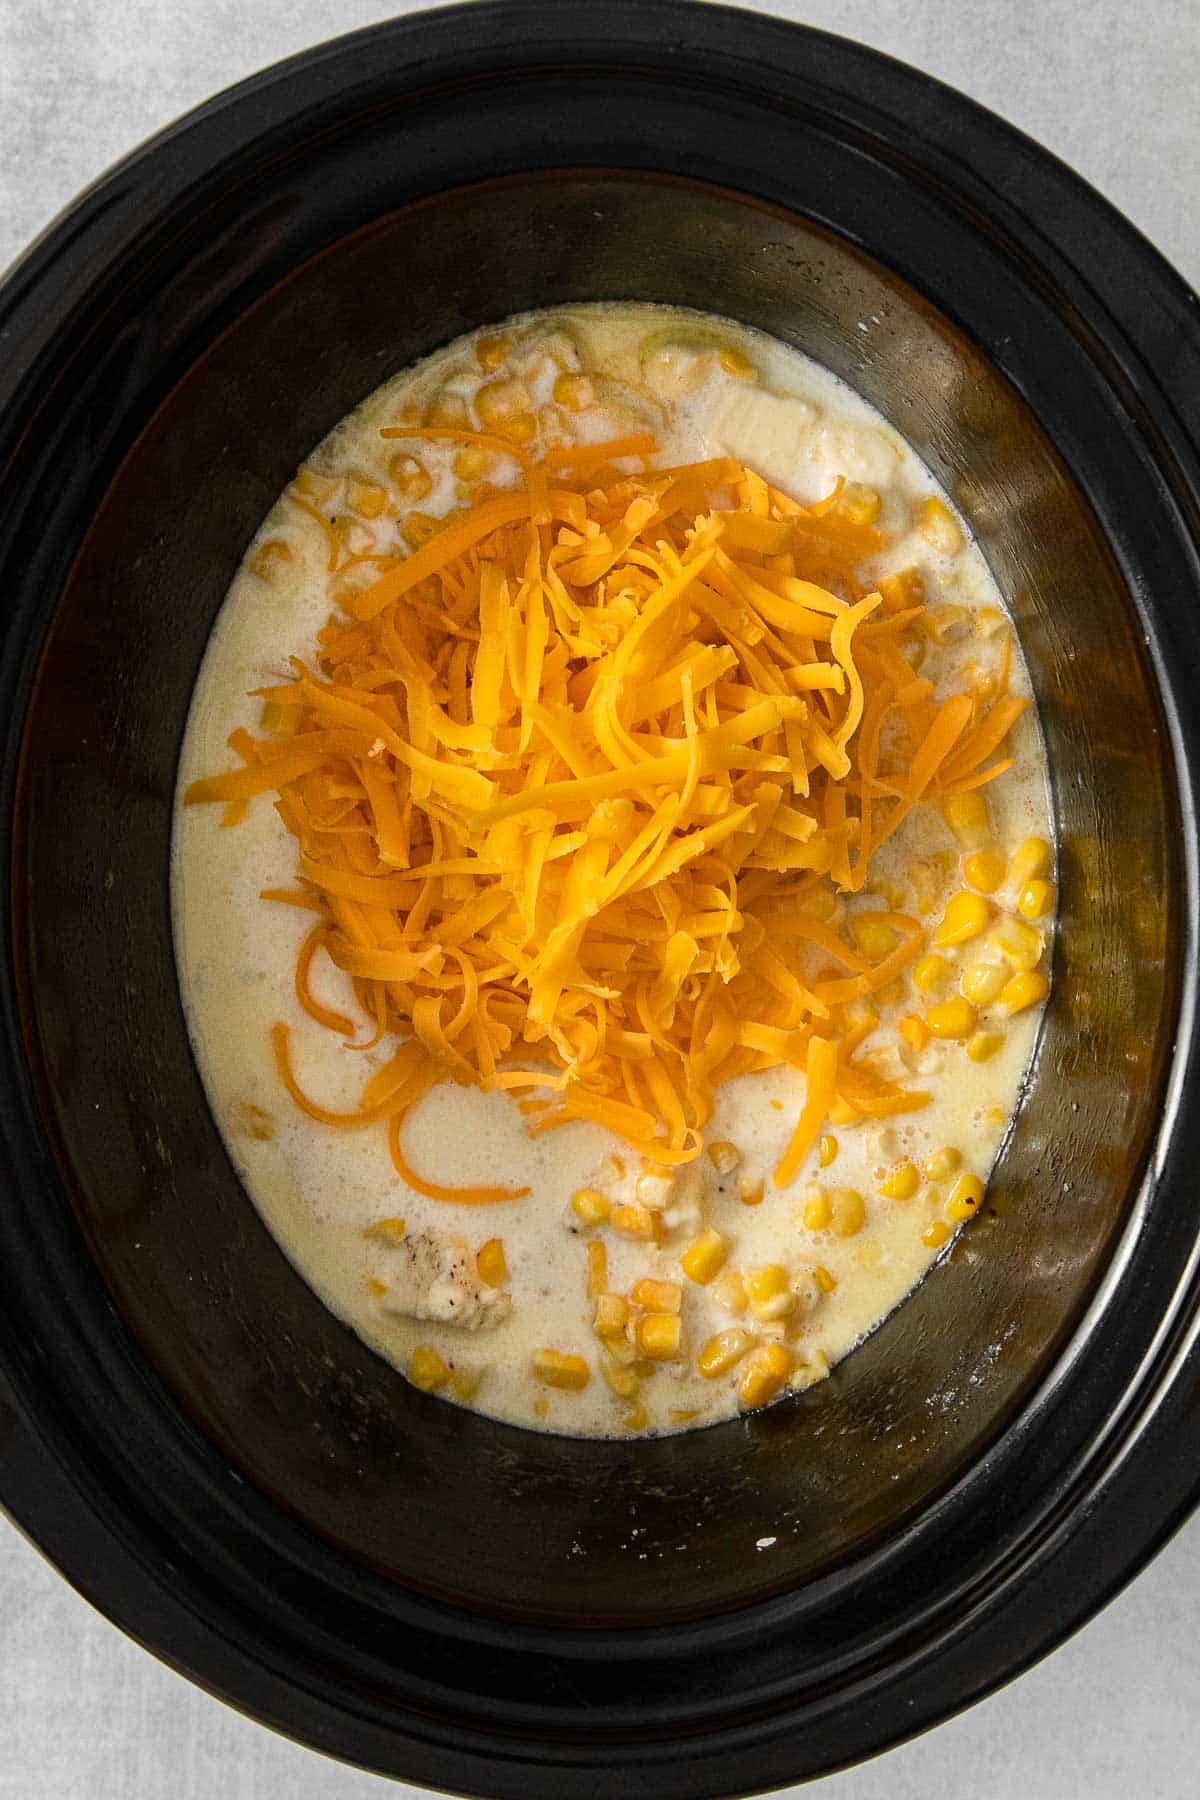 Cheddar cheese added to crockpot mixture.